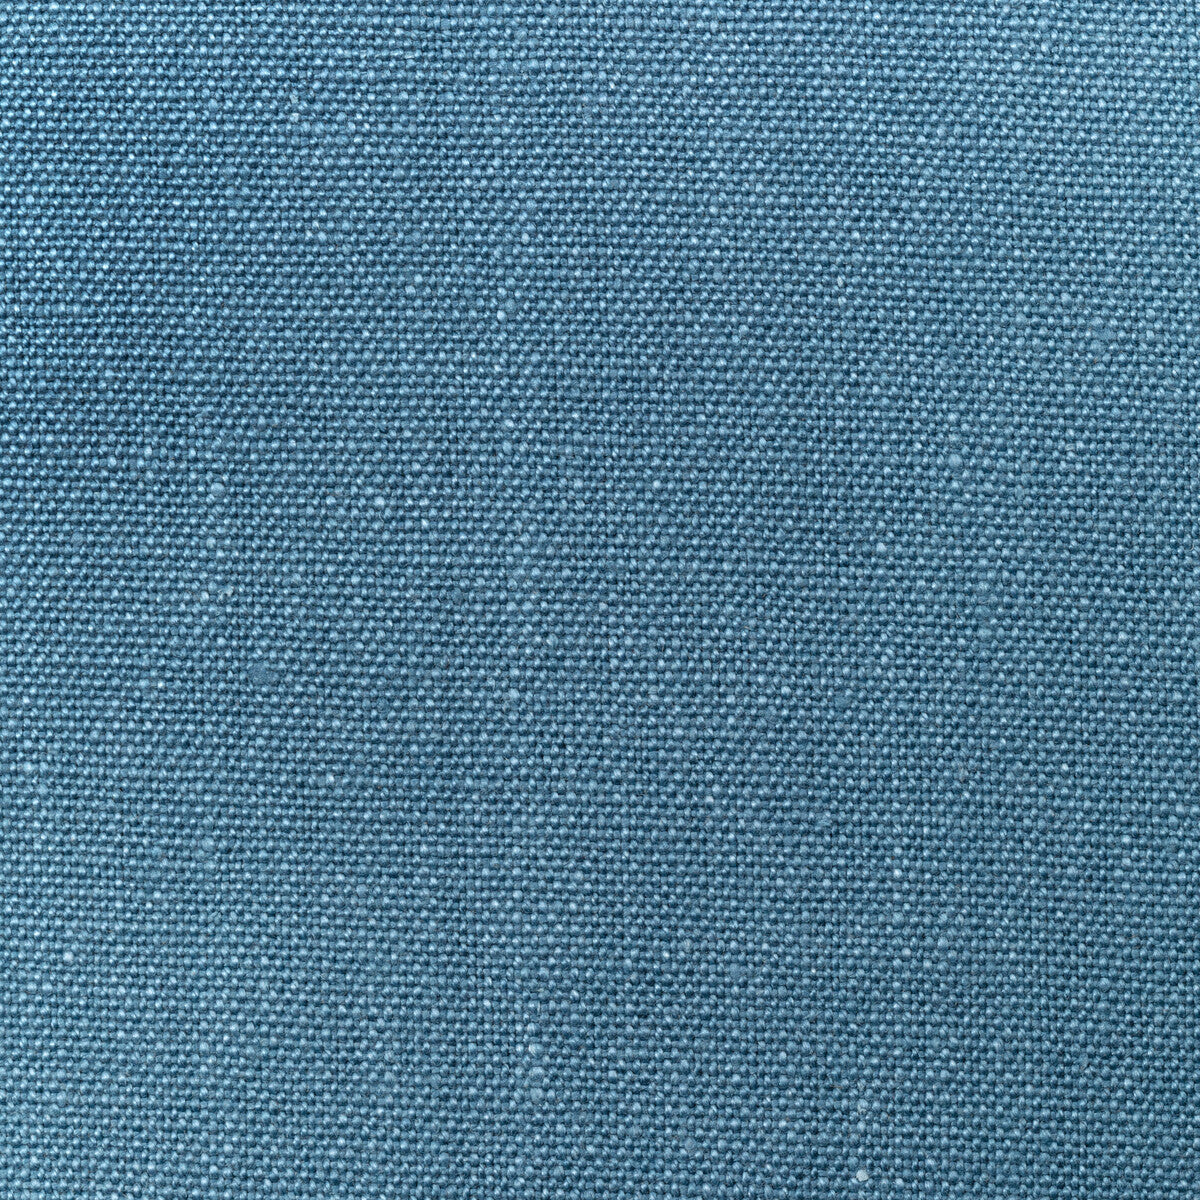 Watermill fabric in denim color - pattern 30421.515.0 - by Kravet Basics in the Perfect Plains collection